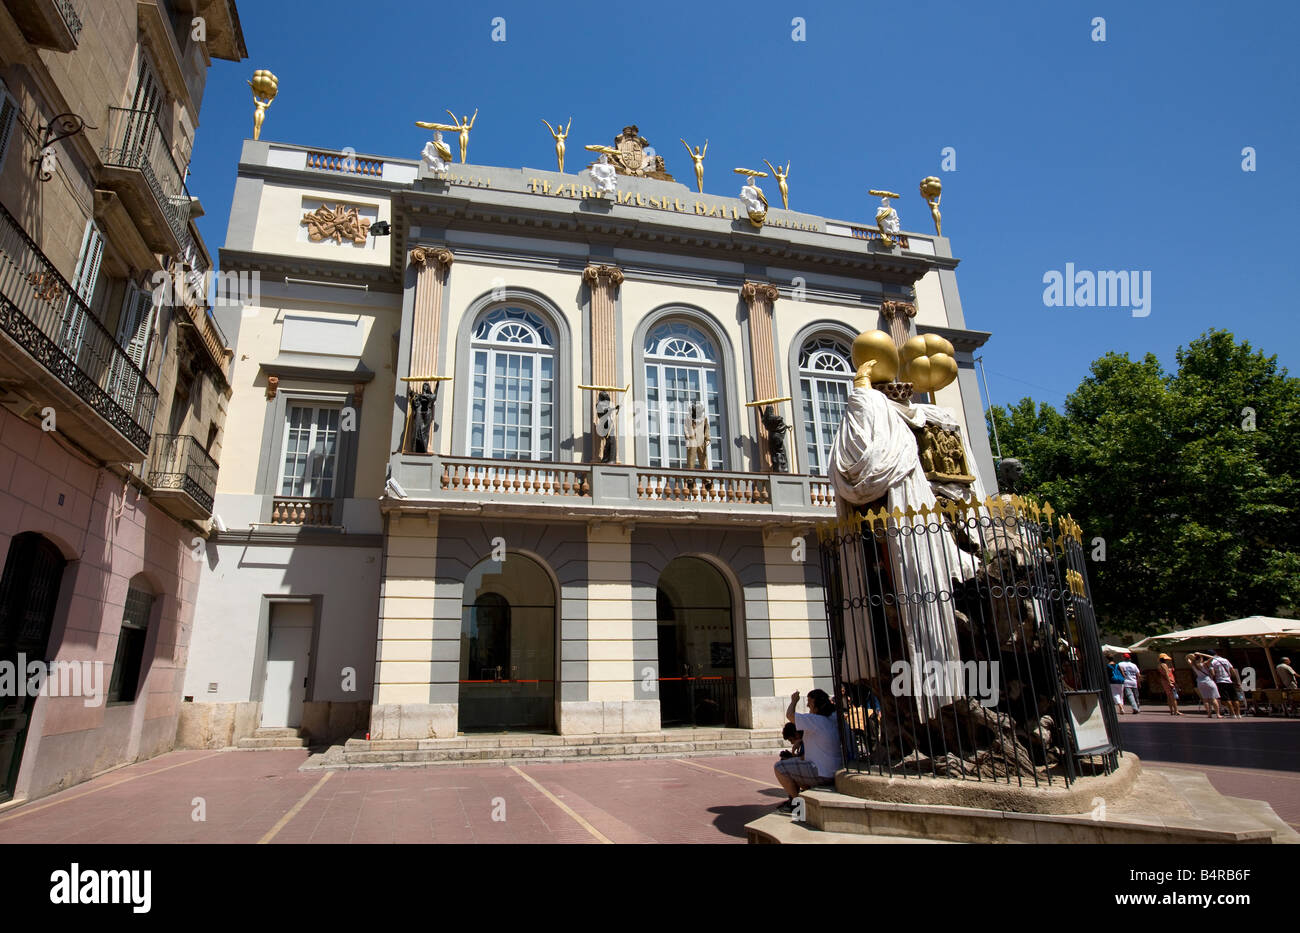 Main entrance of Dali Museum building, Figueras Stock Photo